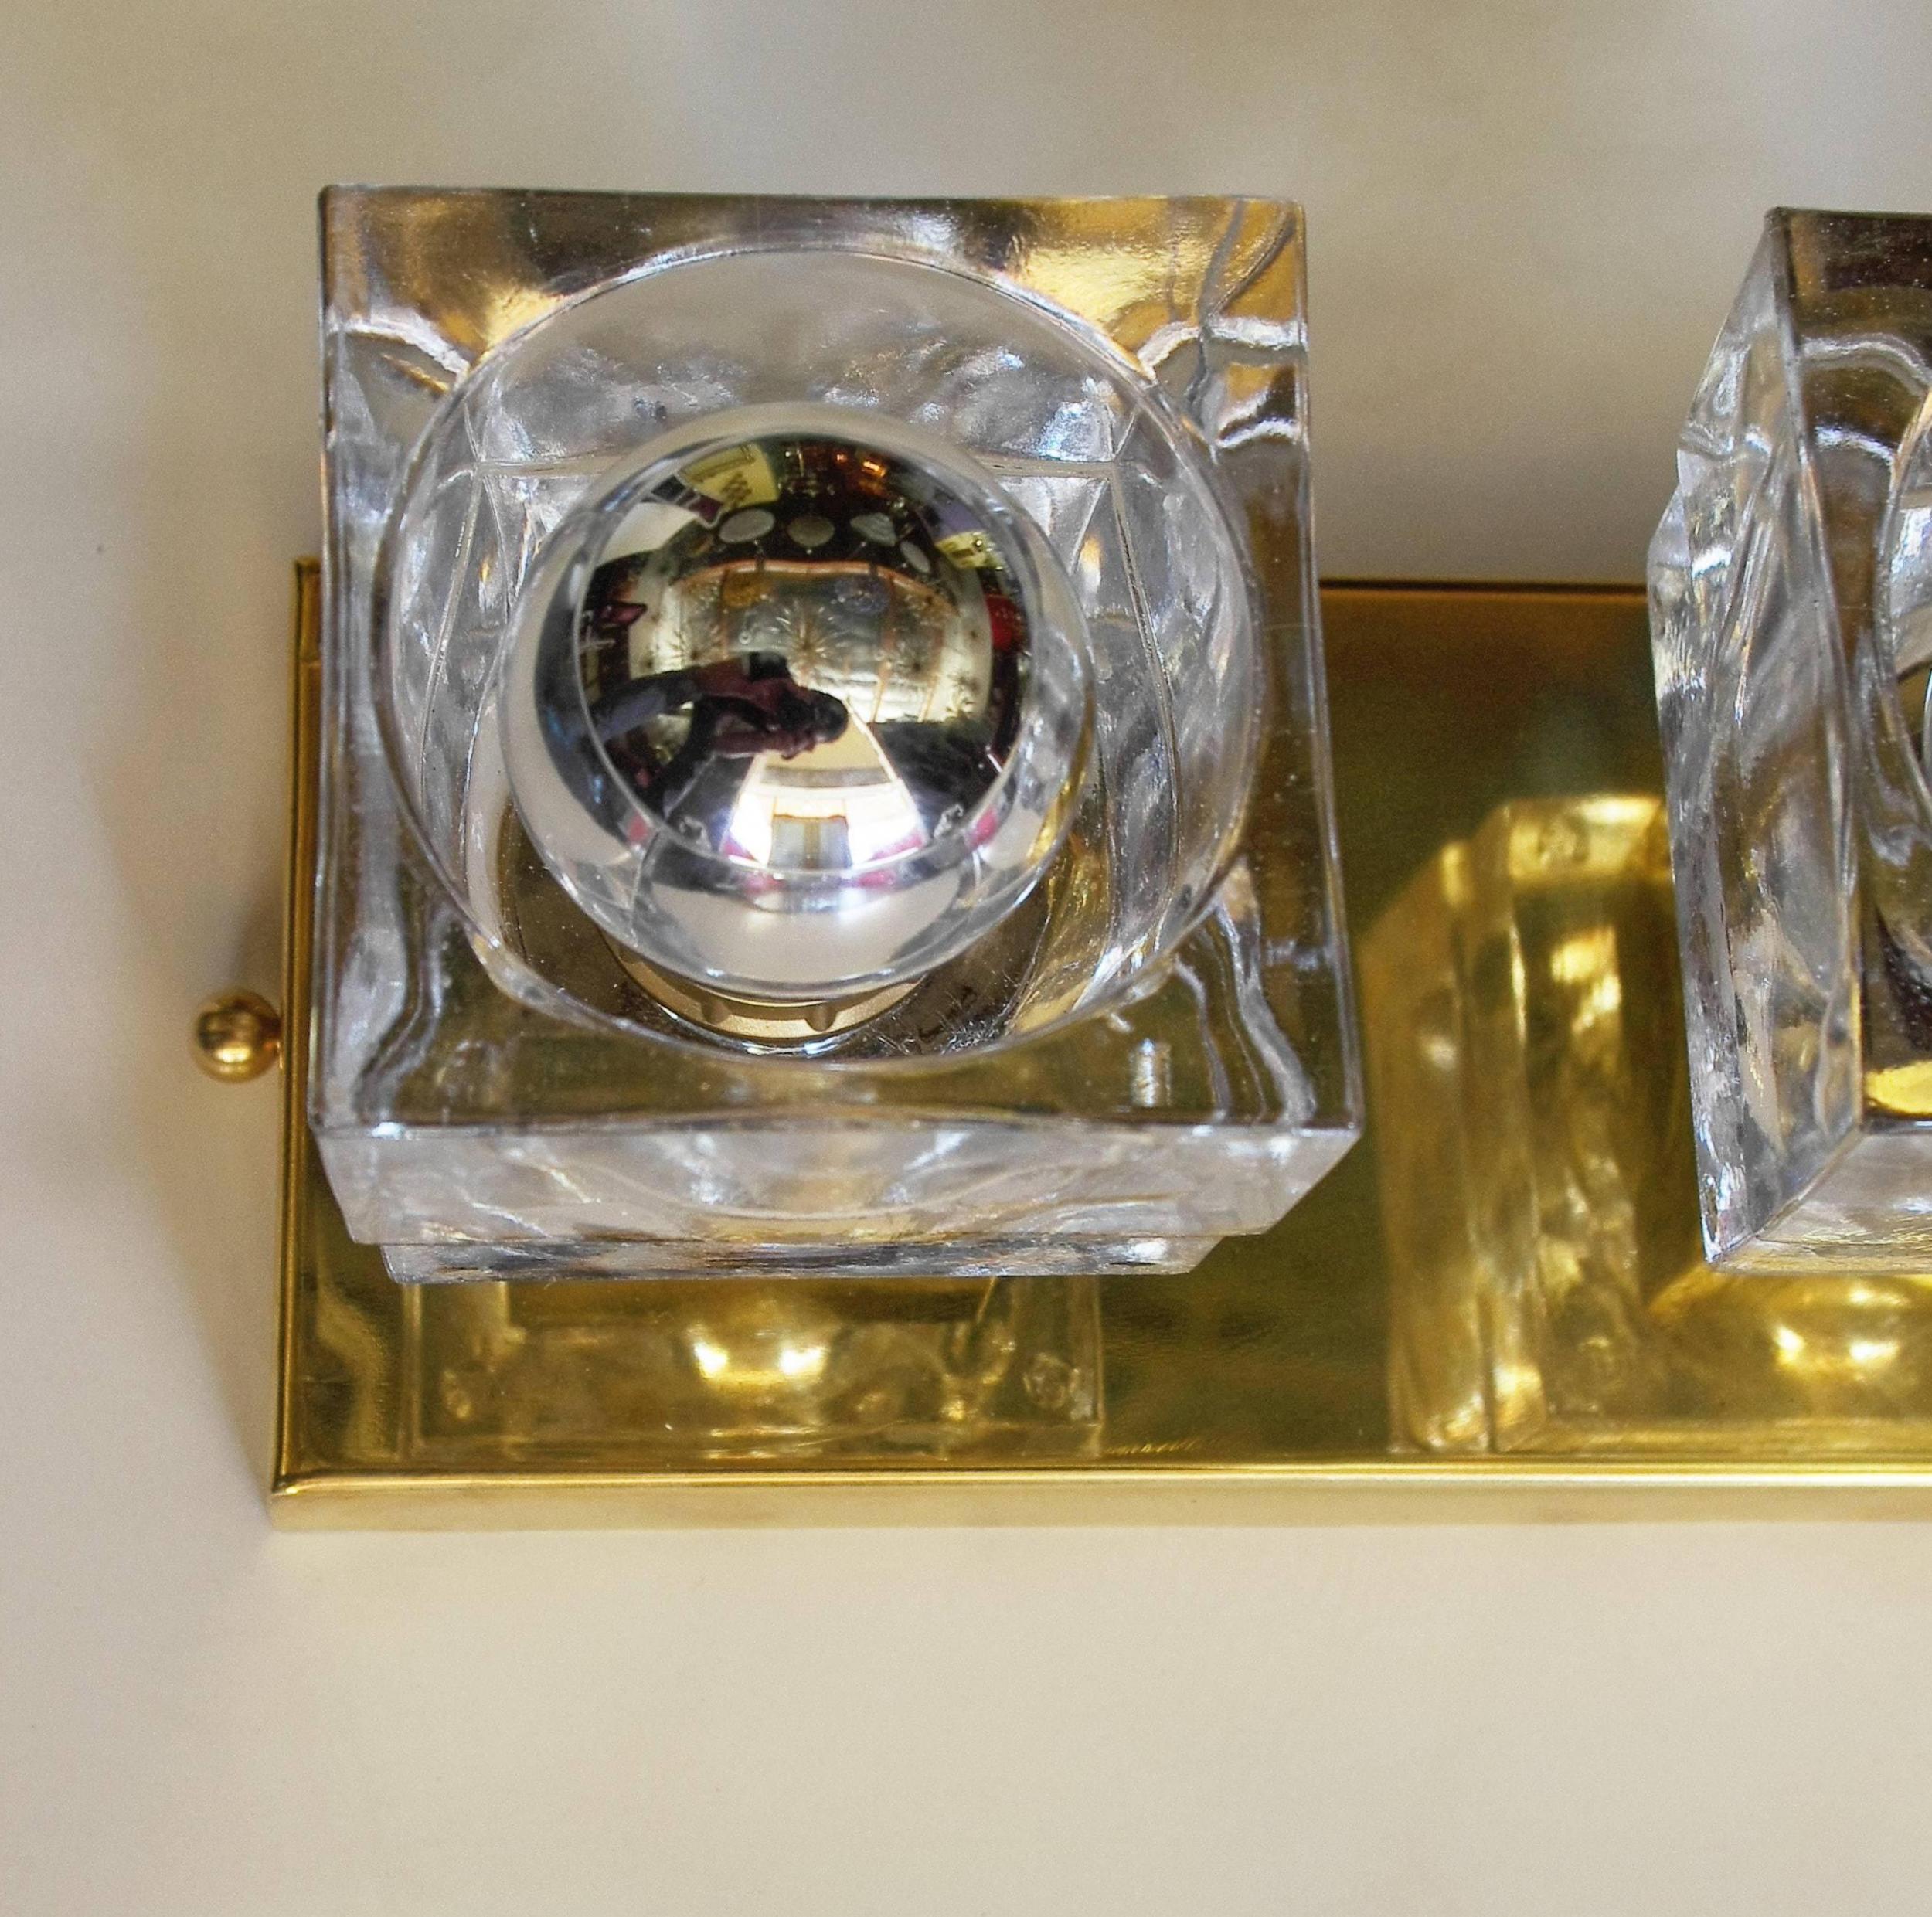 One Italian Sconce with Sciolari 1960s vintage clear Murano glass cubes mounted on polished brass frames / Made in Italy